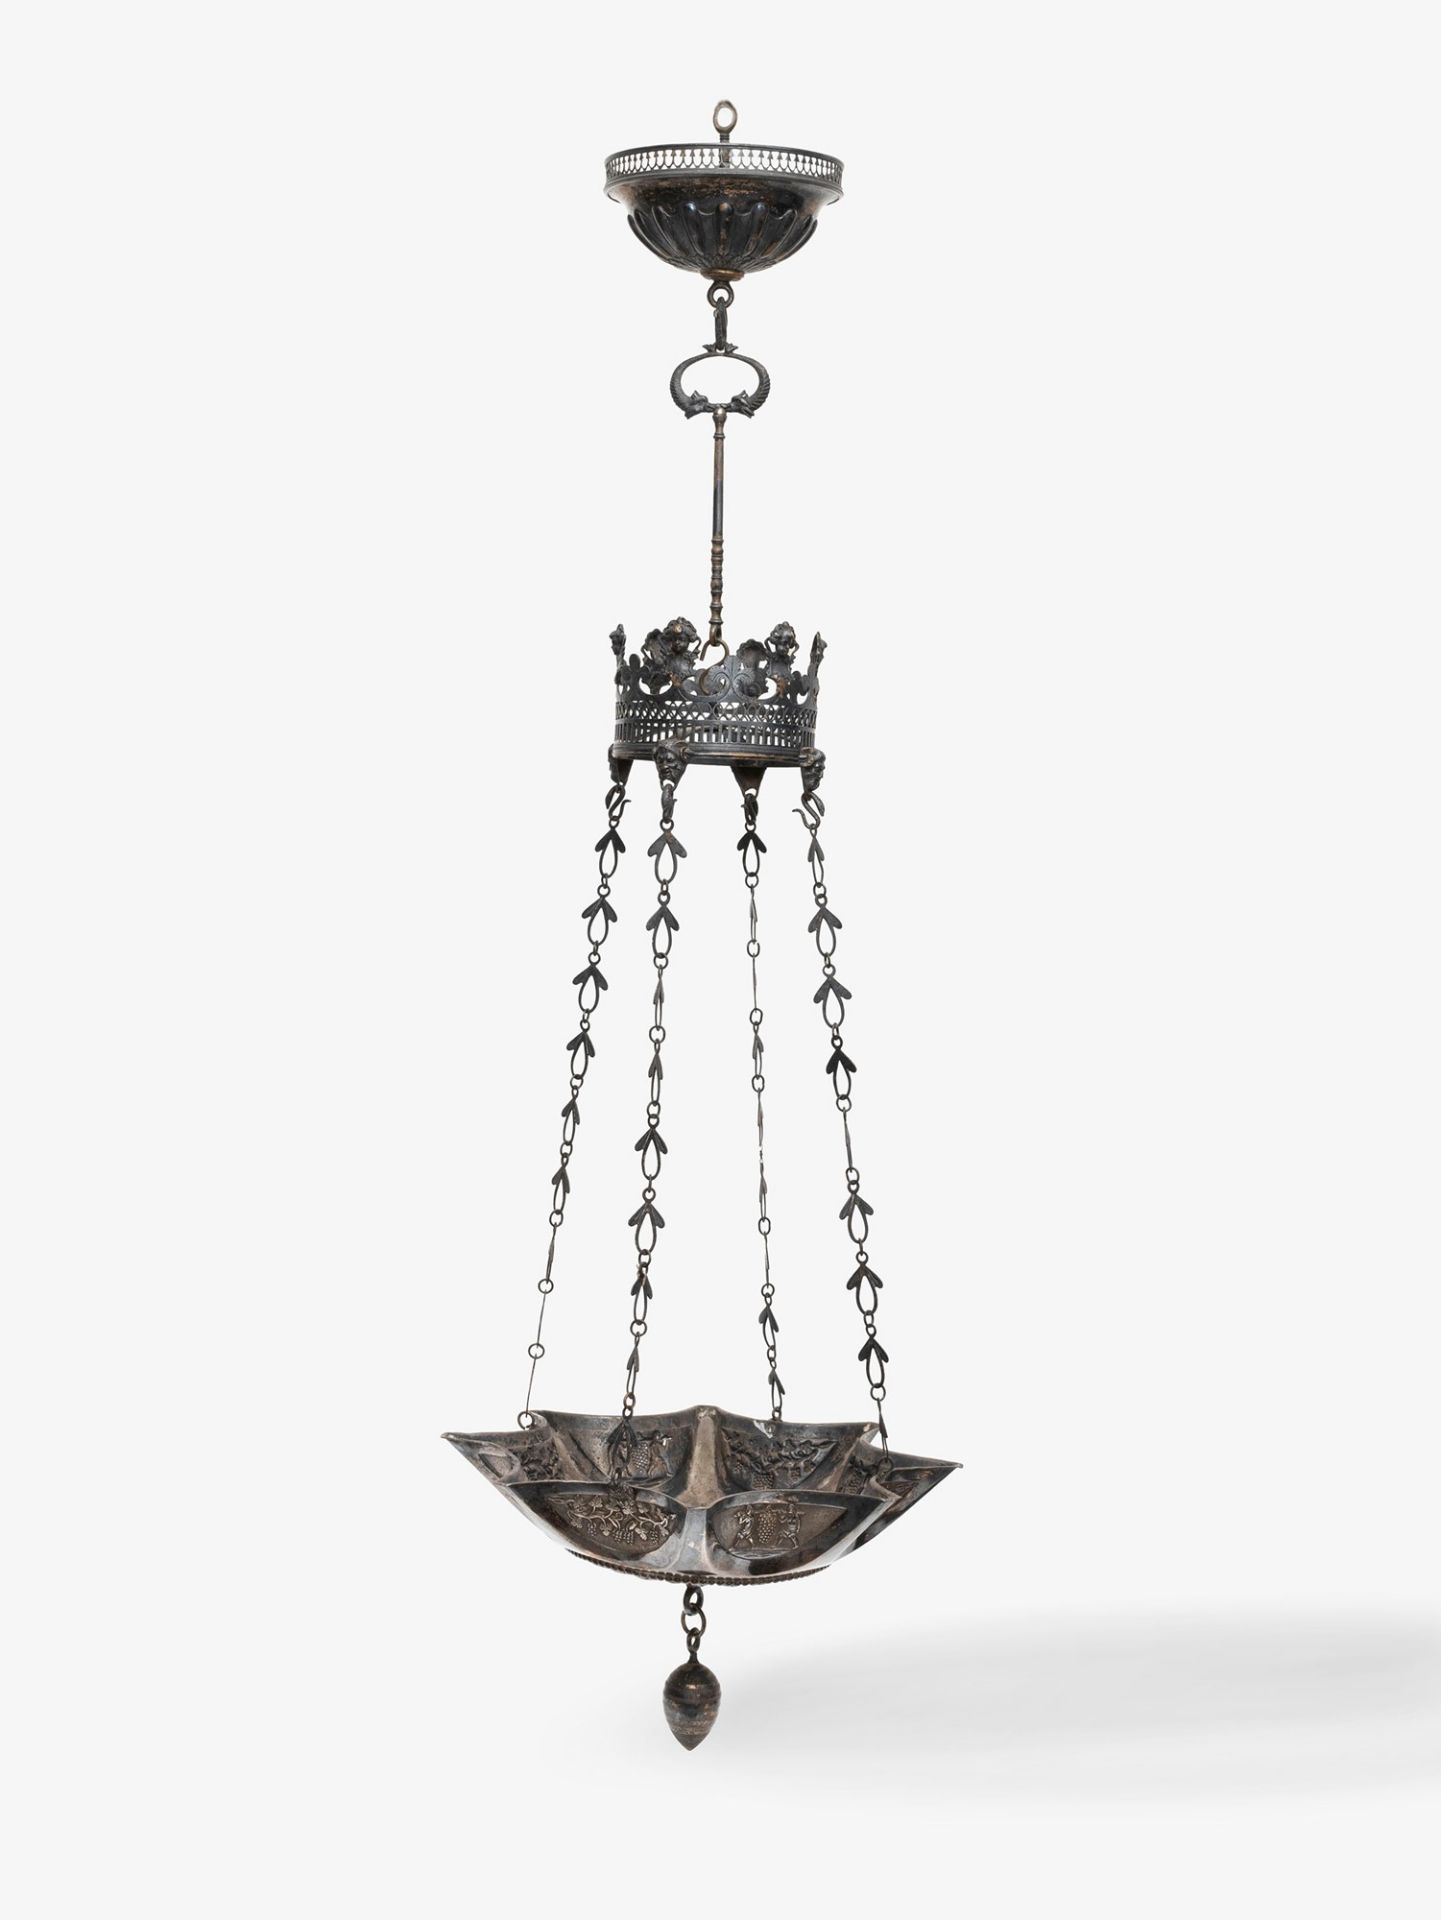 Silver chandelier, early 20th century